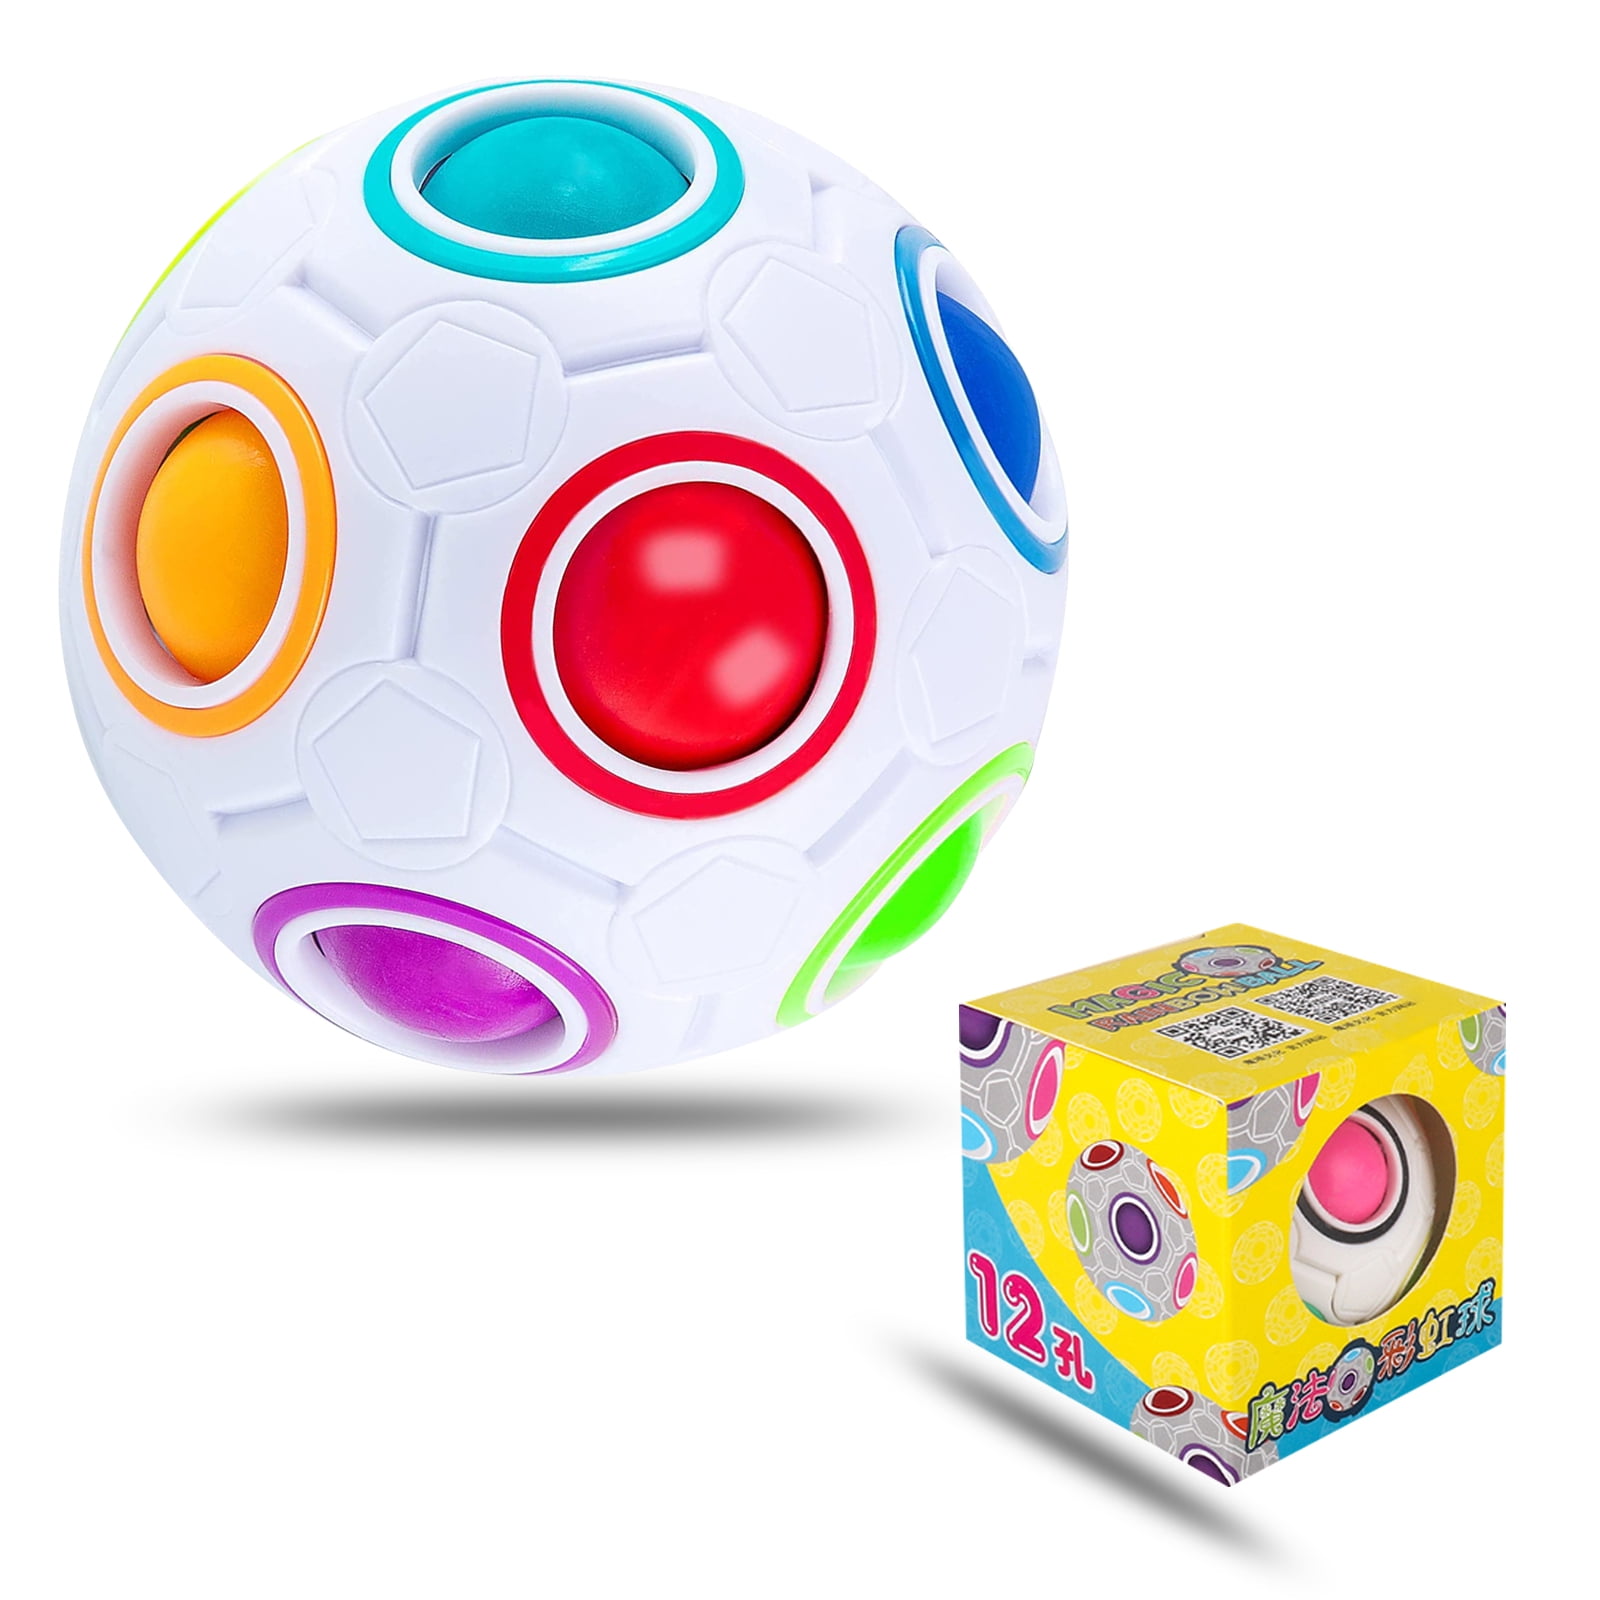 Magic Ball Brain Memory Toy 12-Hole Magic Rainbow Puzzle Ball Intellectual Game Toy to Relieve Stress Color 